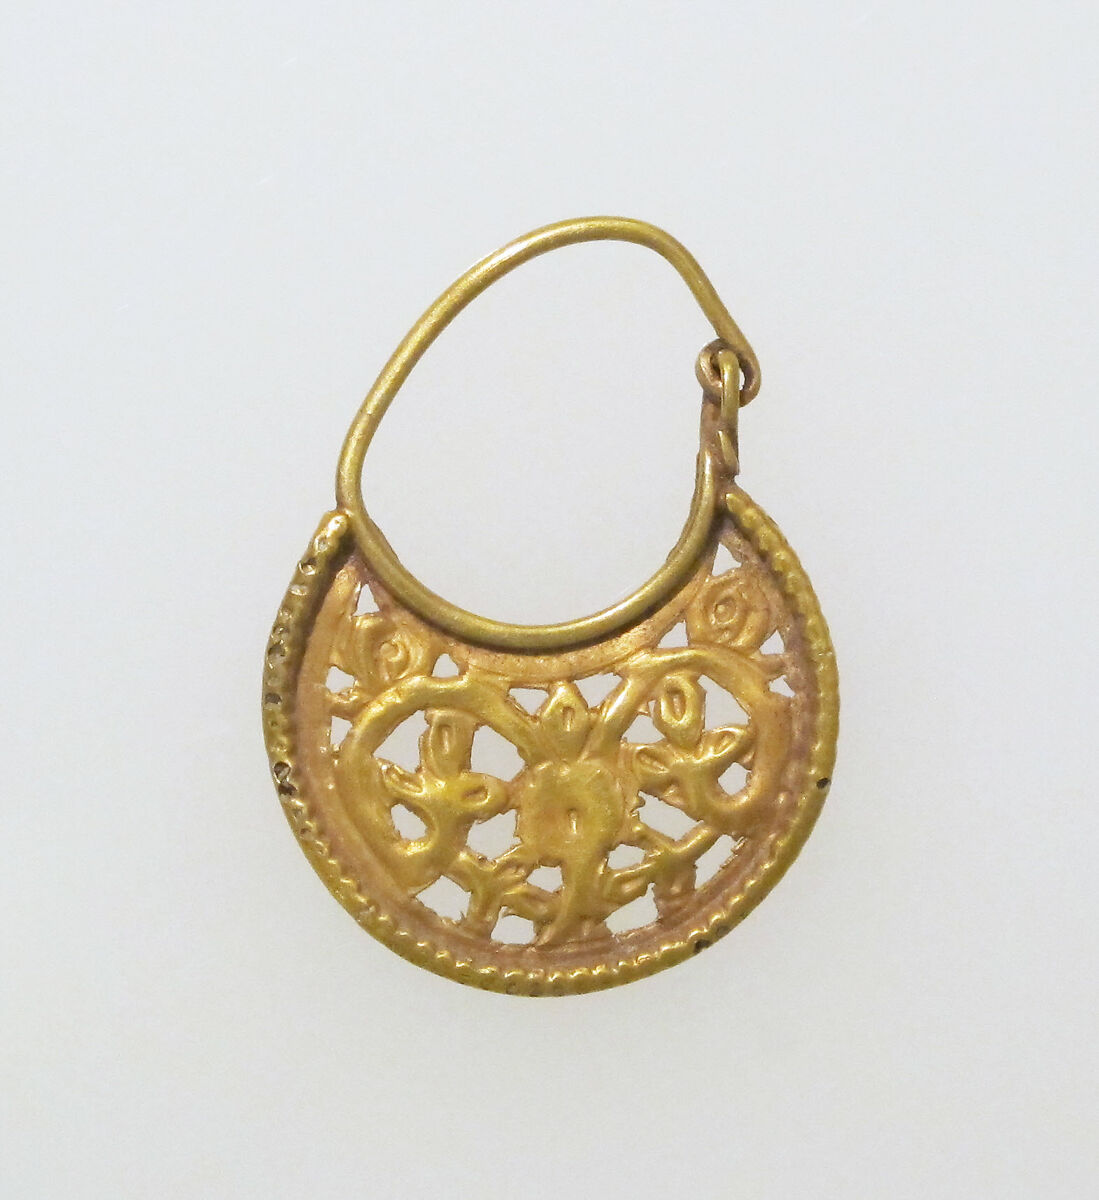 Gold lunate earring with scrolls, Gold, Byzantine 